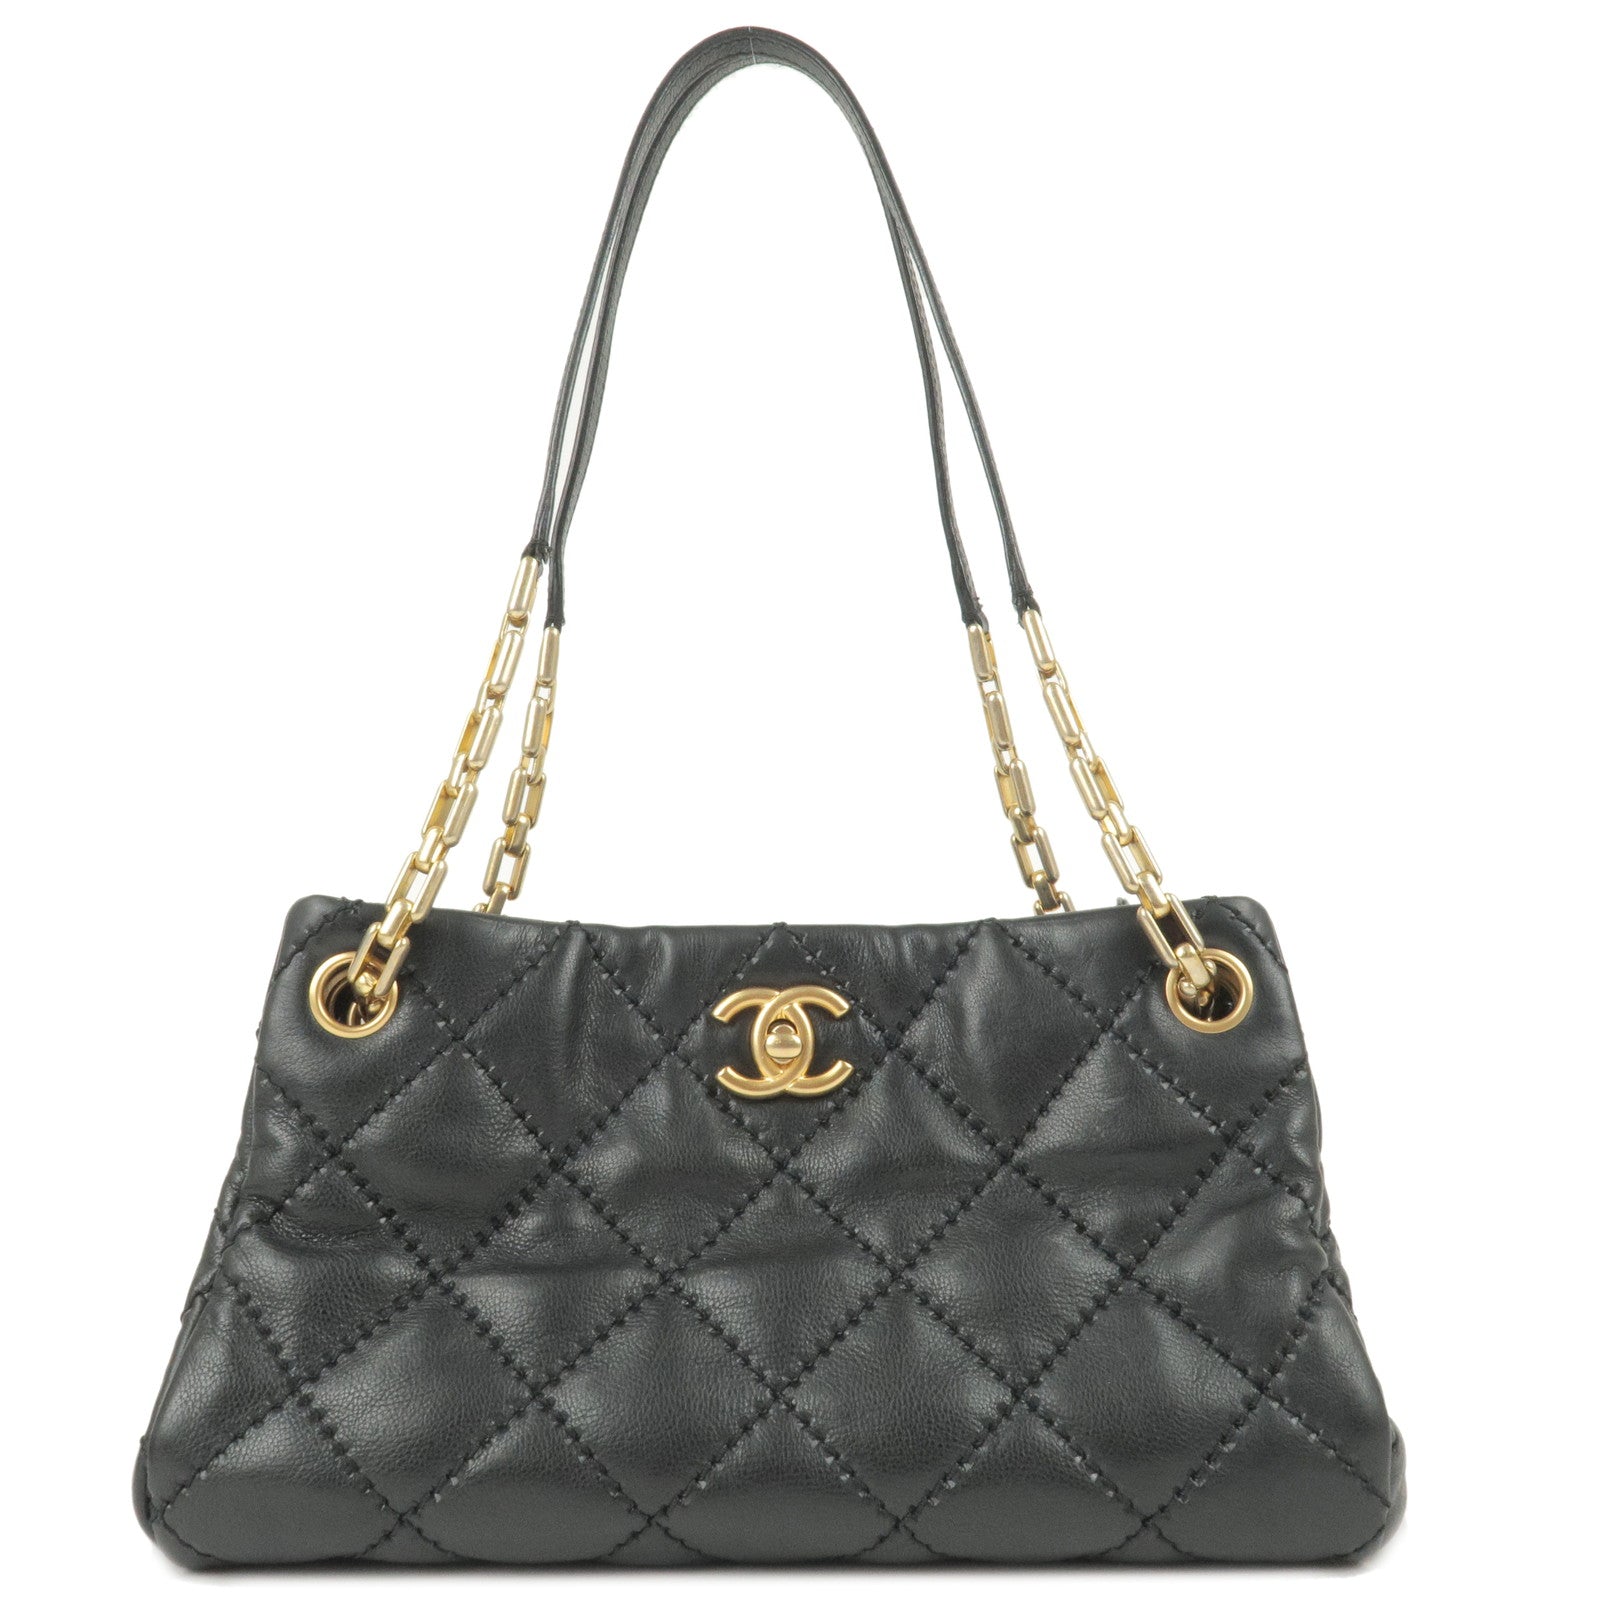 Chanel Black Quilted Leather Small Gabrielle Bag Chanel